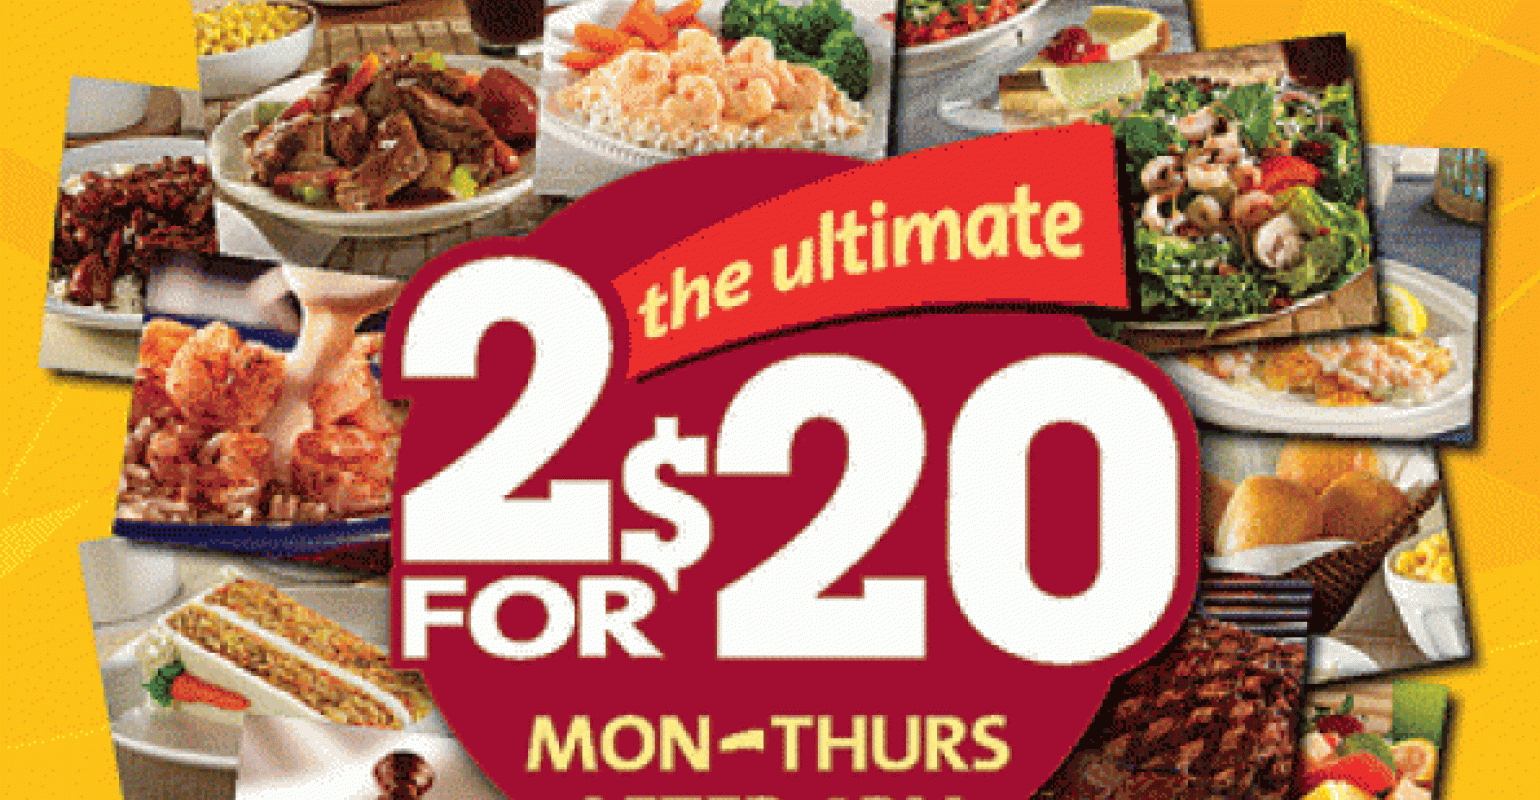 Golden Corral touts value with 2 for $20 deal | Nation's Restaurant News